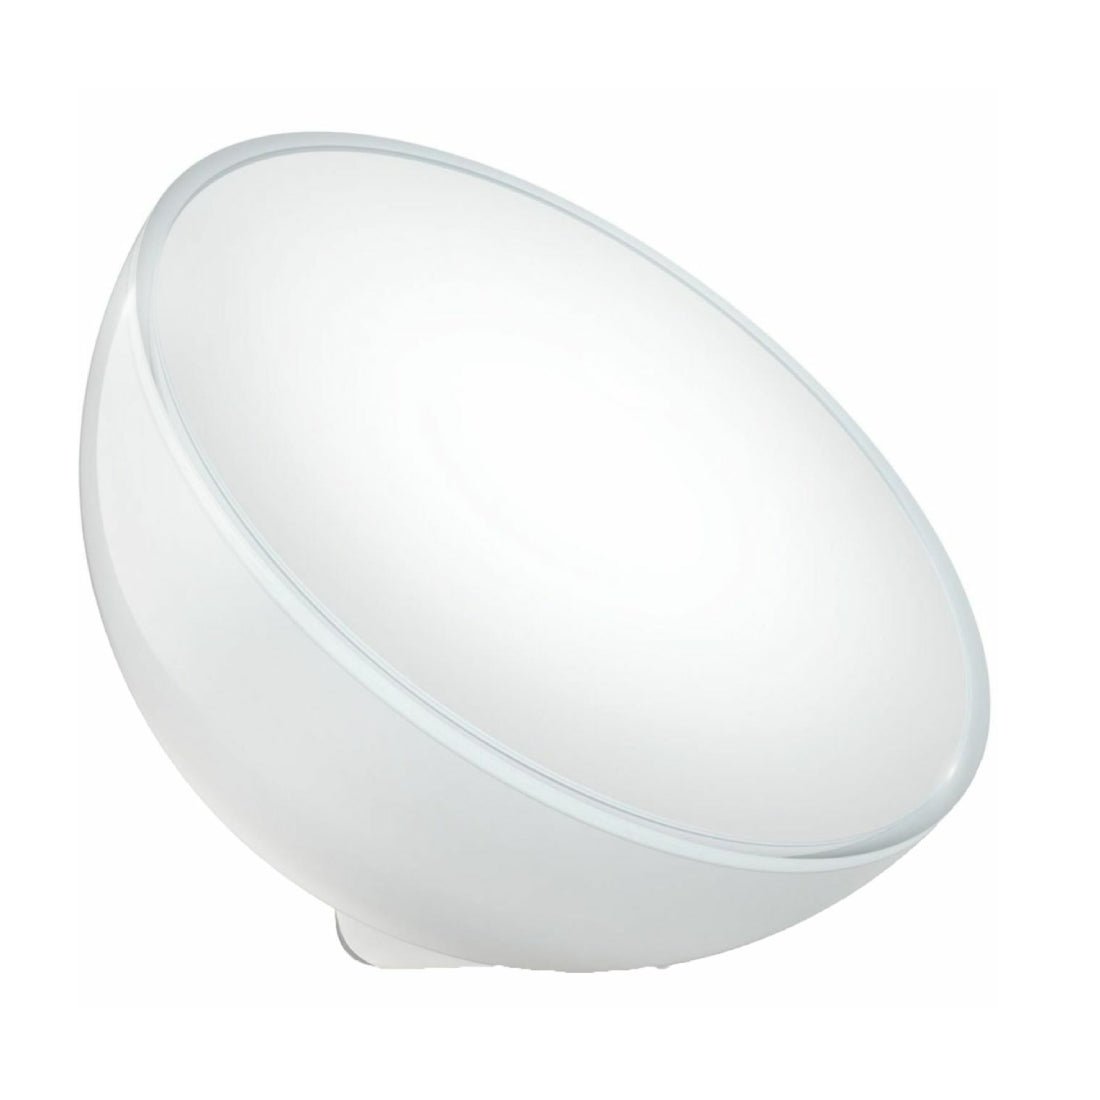 Philips Hue Go Ambiance Smart Portable Light - White & Color - ضوء - Store 974 | ستور ٩٧٤